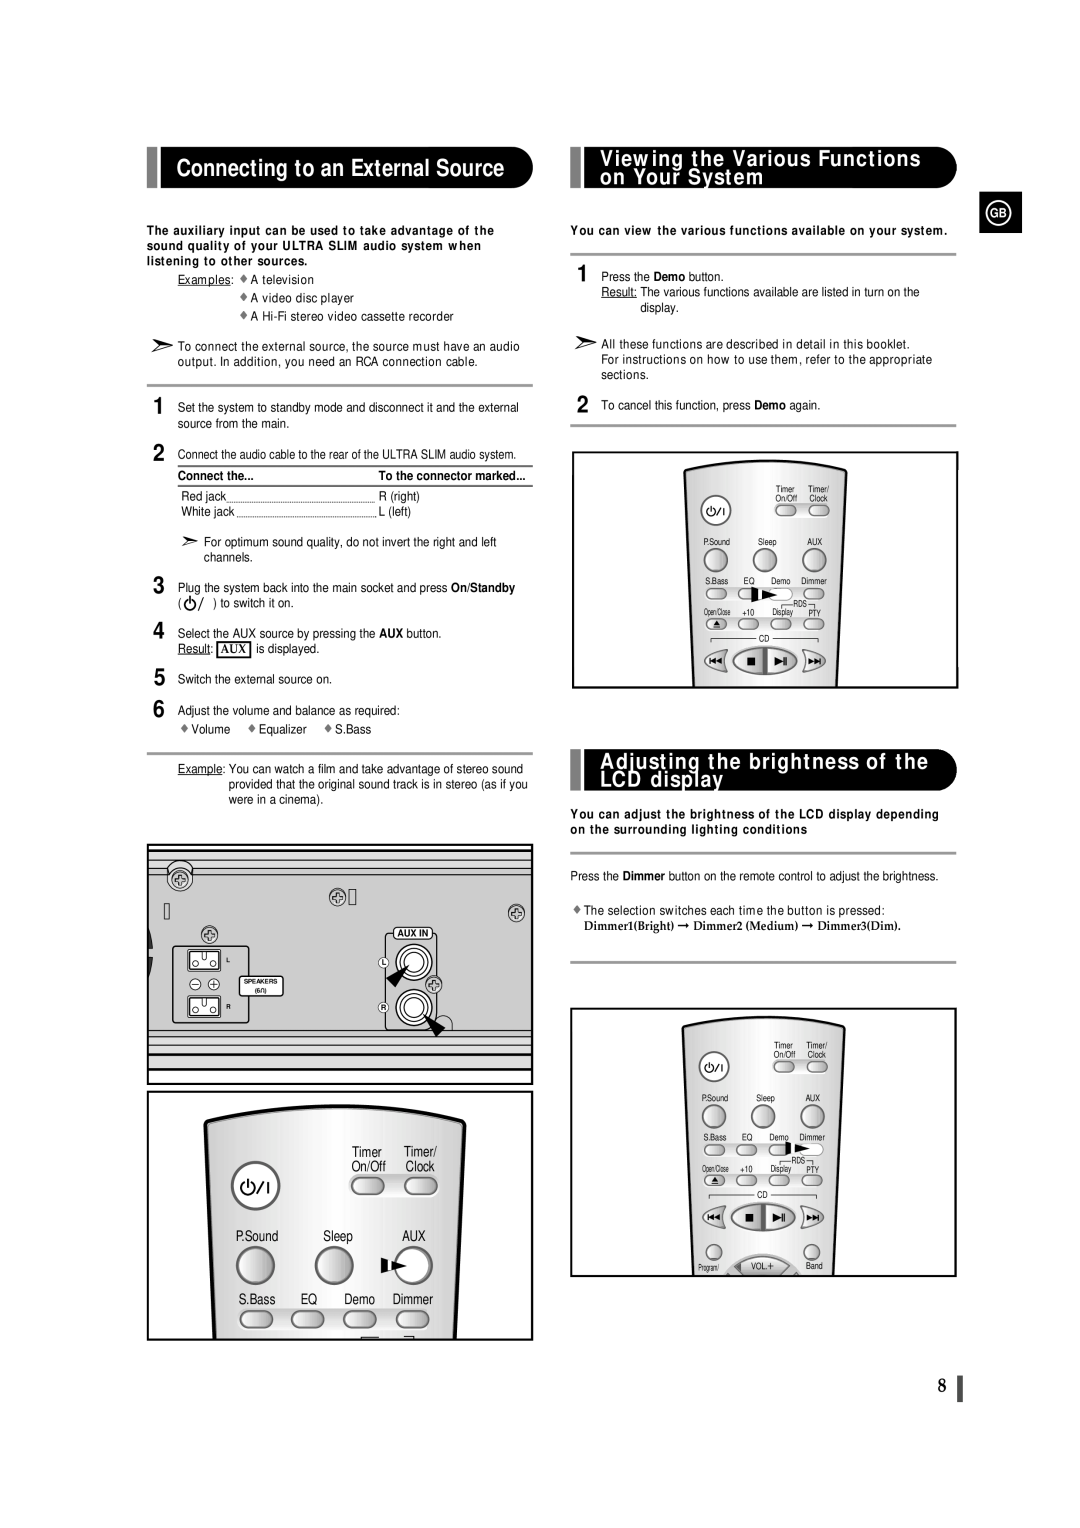 Samsung EV-1S instruction manual Connecting to an External Source, Viewing the Various Functions on Your System 